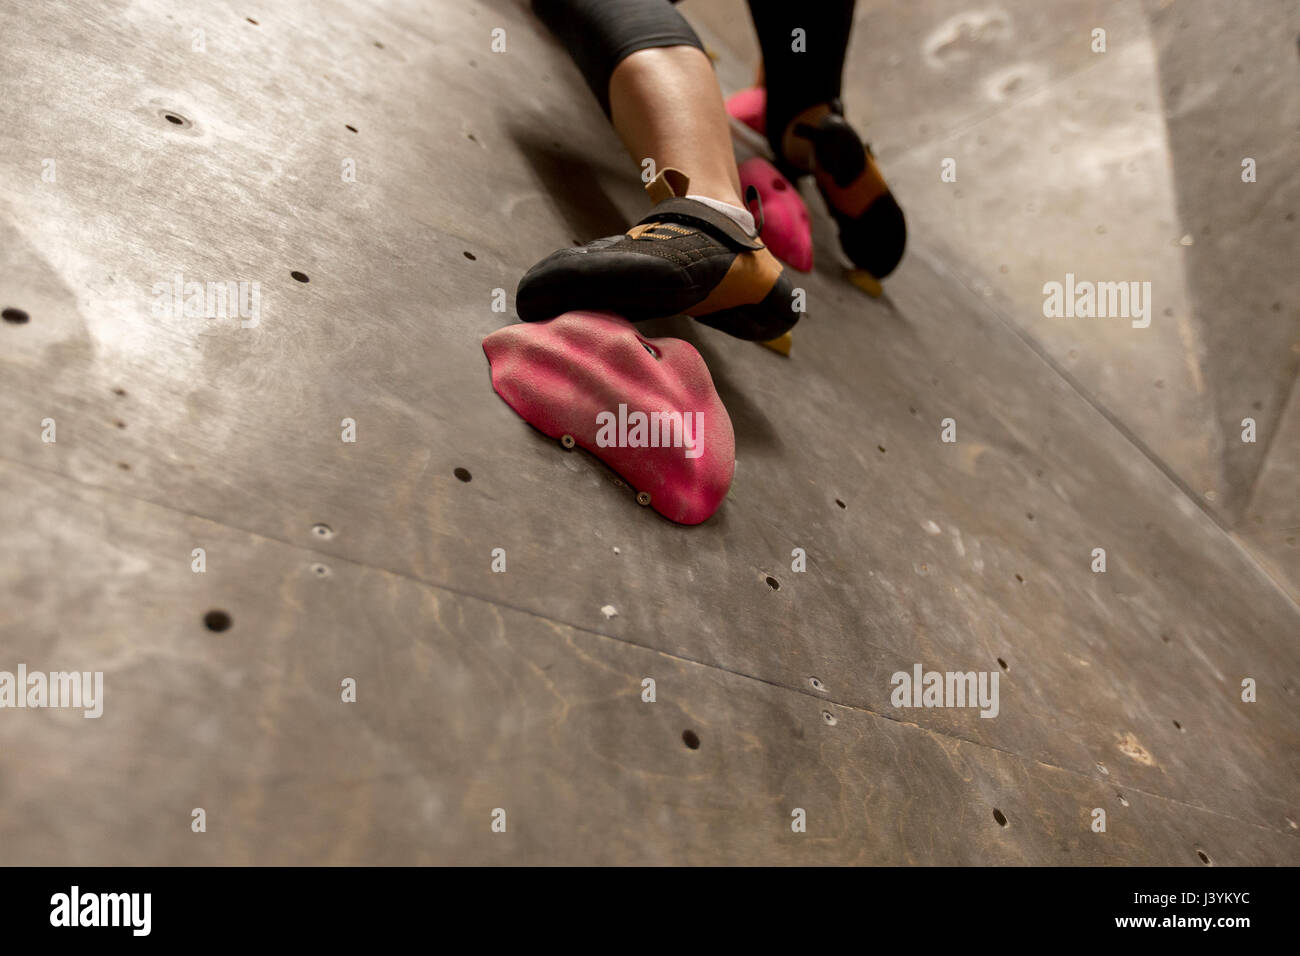 foot of woman exercising at indoor climbing gym Stock Photo